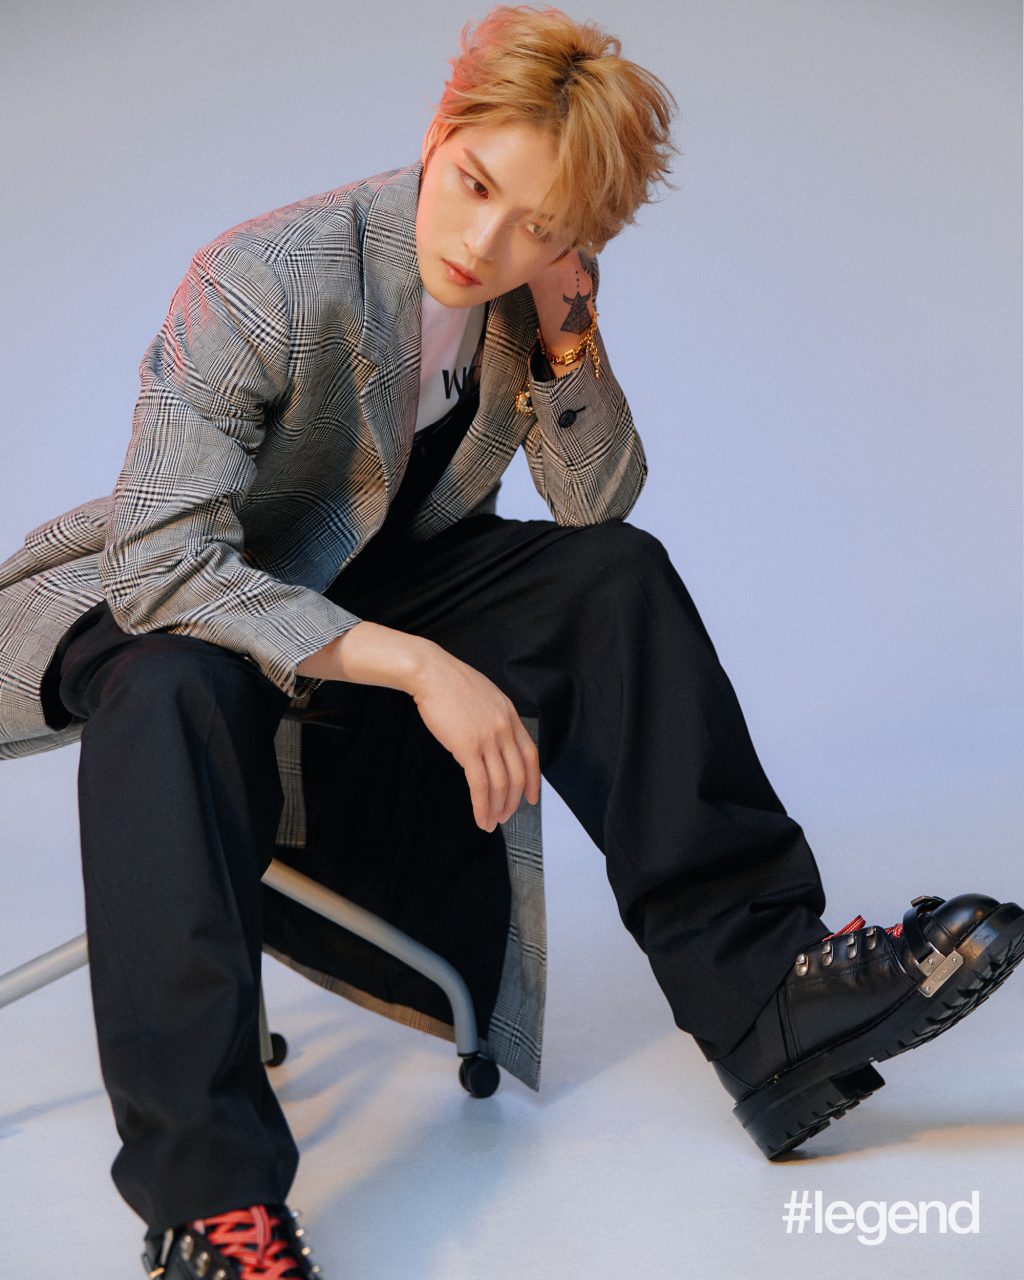 Cover story: Up close and personal with Korean heartthrob Jaejoong Kim ...